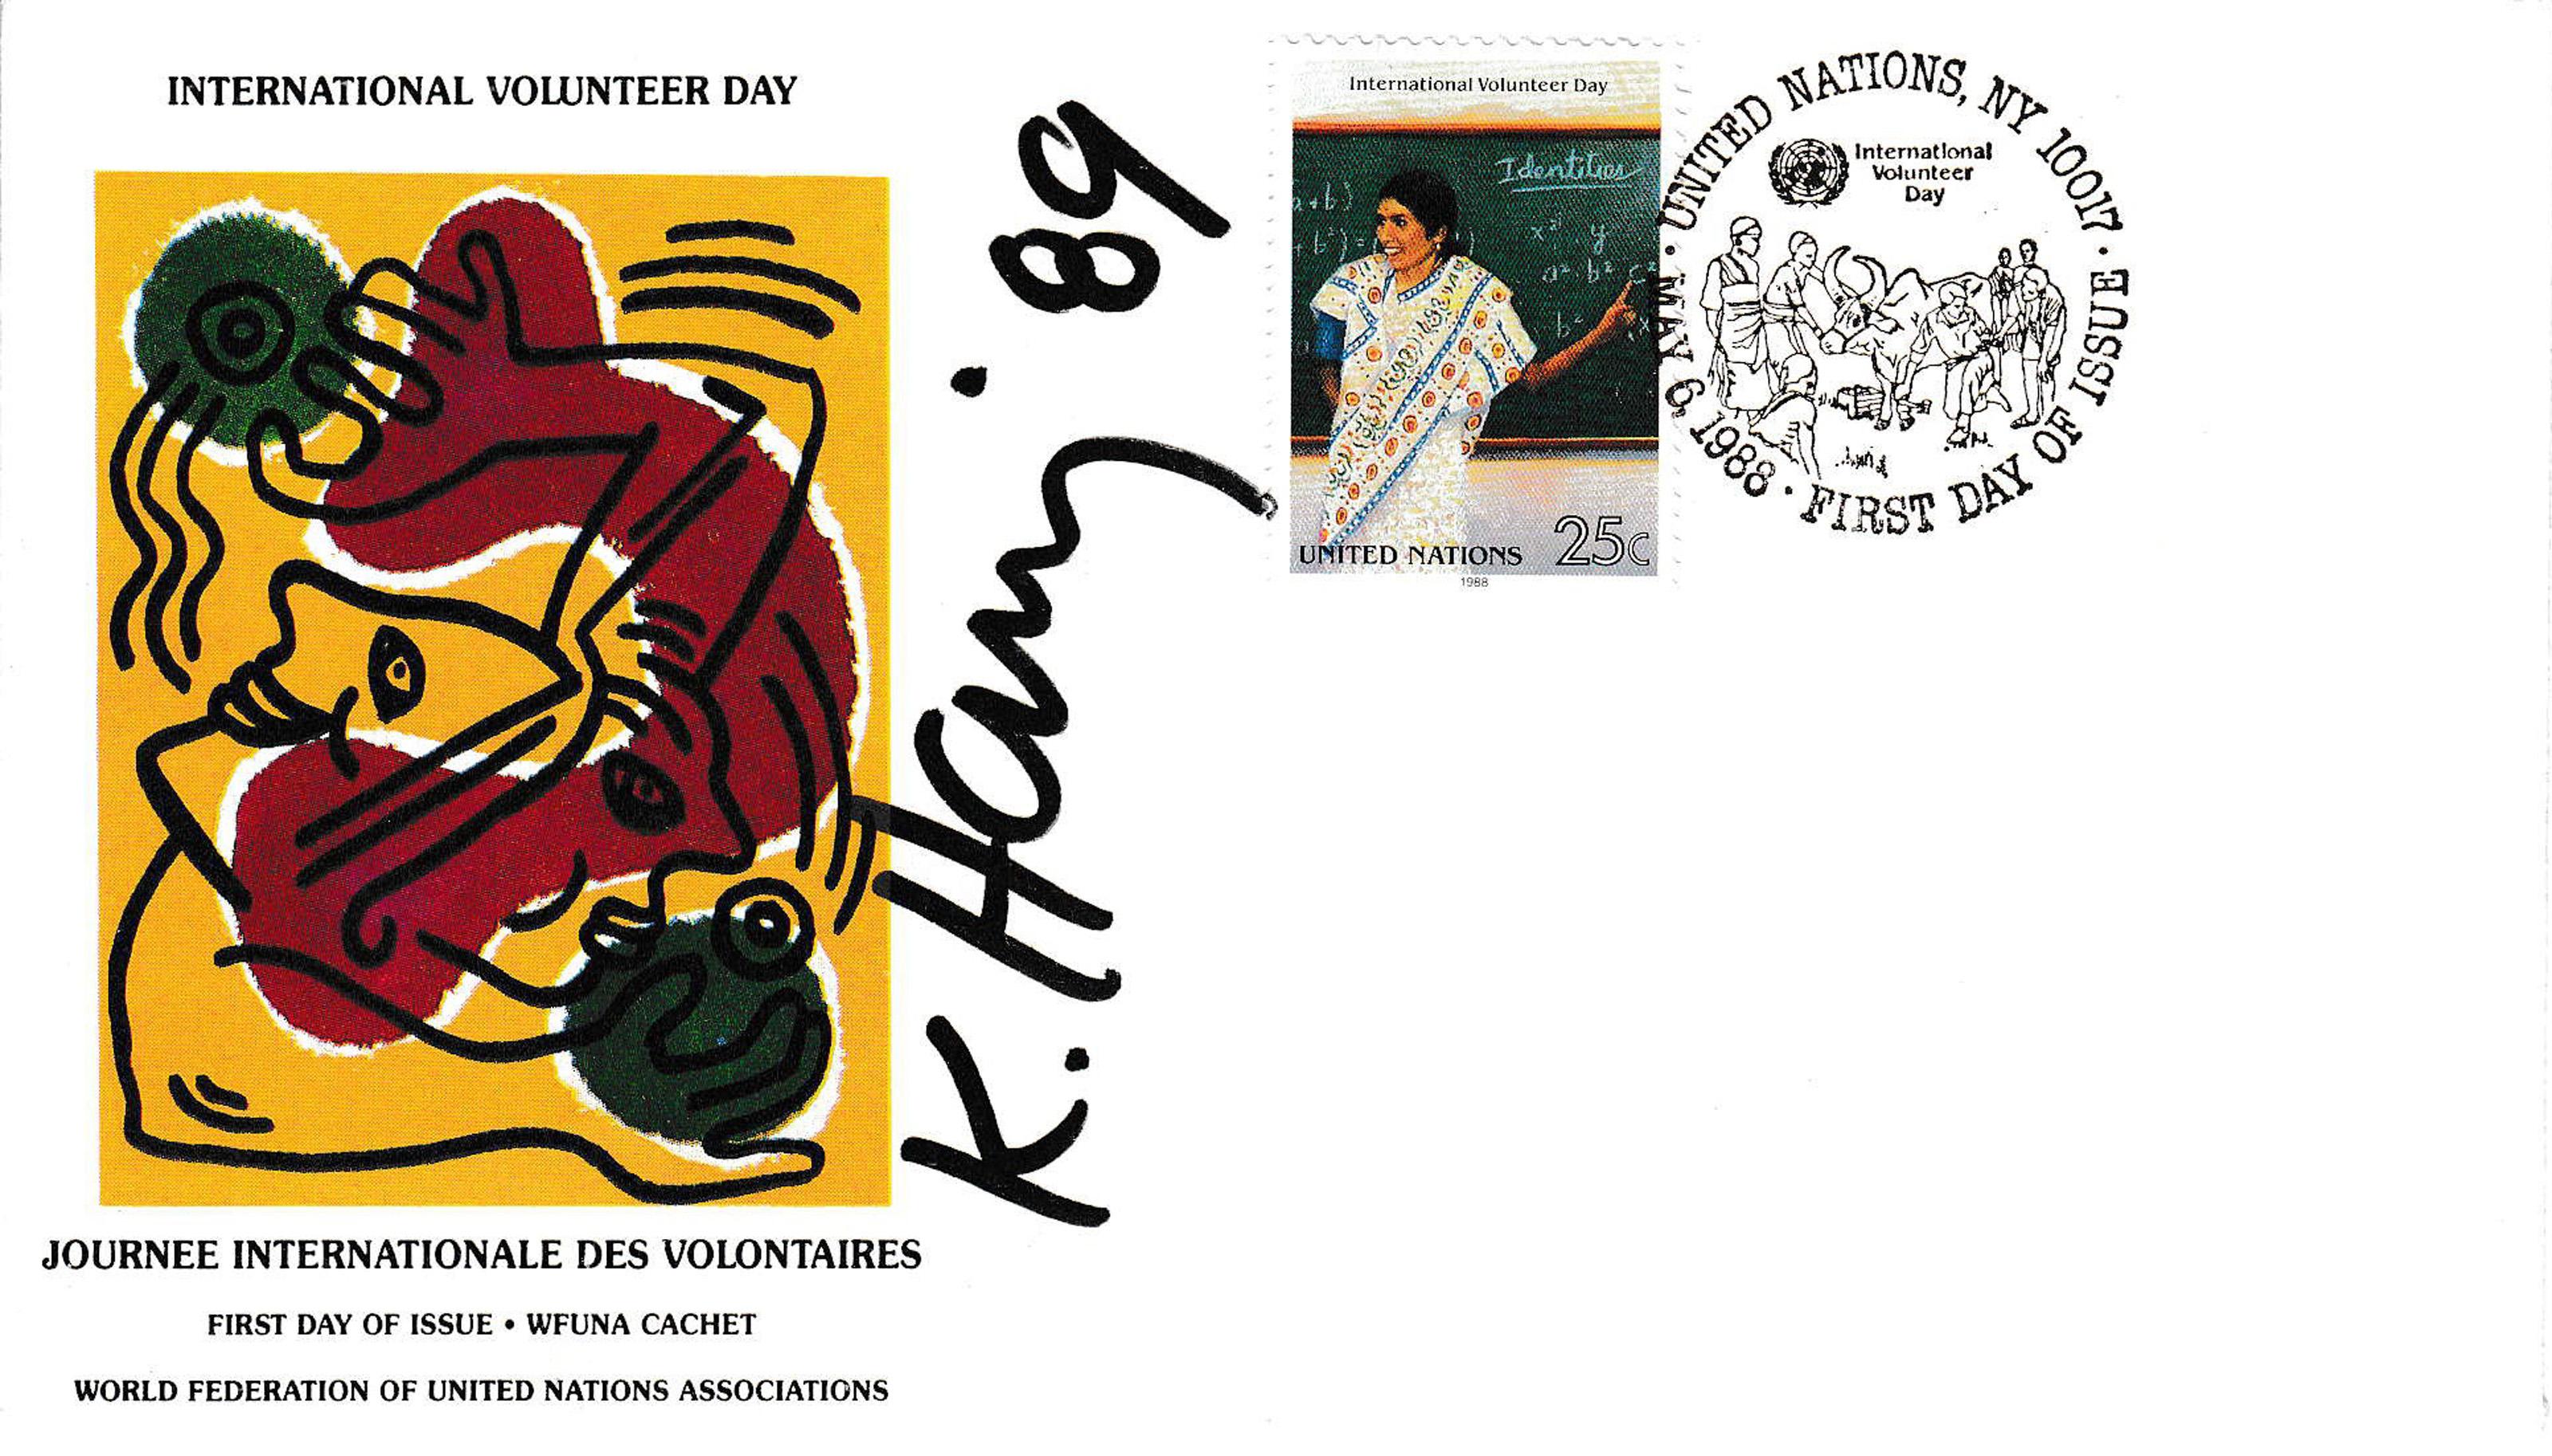 International Volunteer Day Envelope, Signed with Stamp by Keith Haring